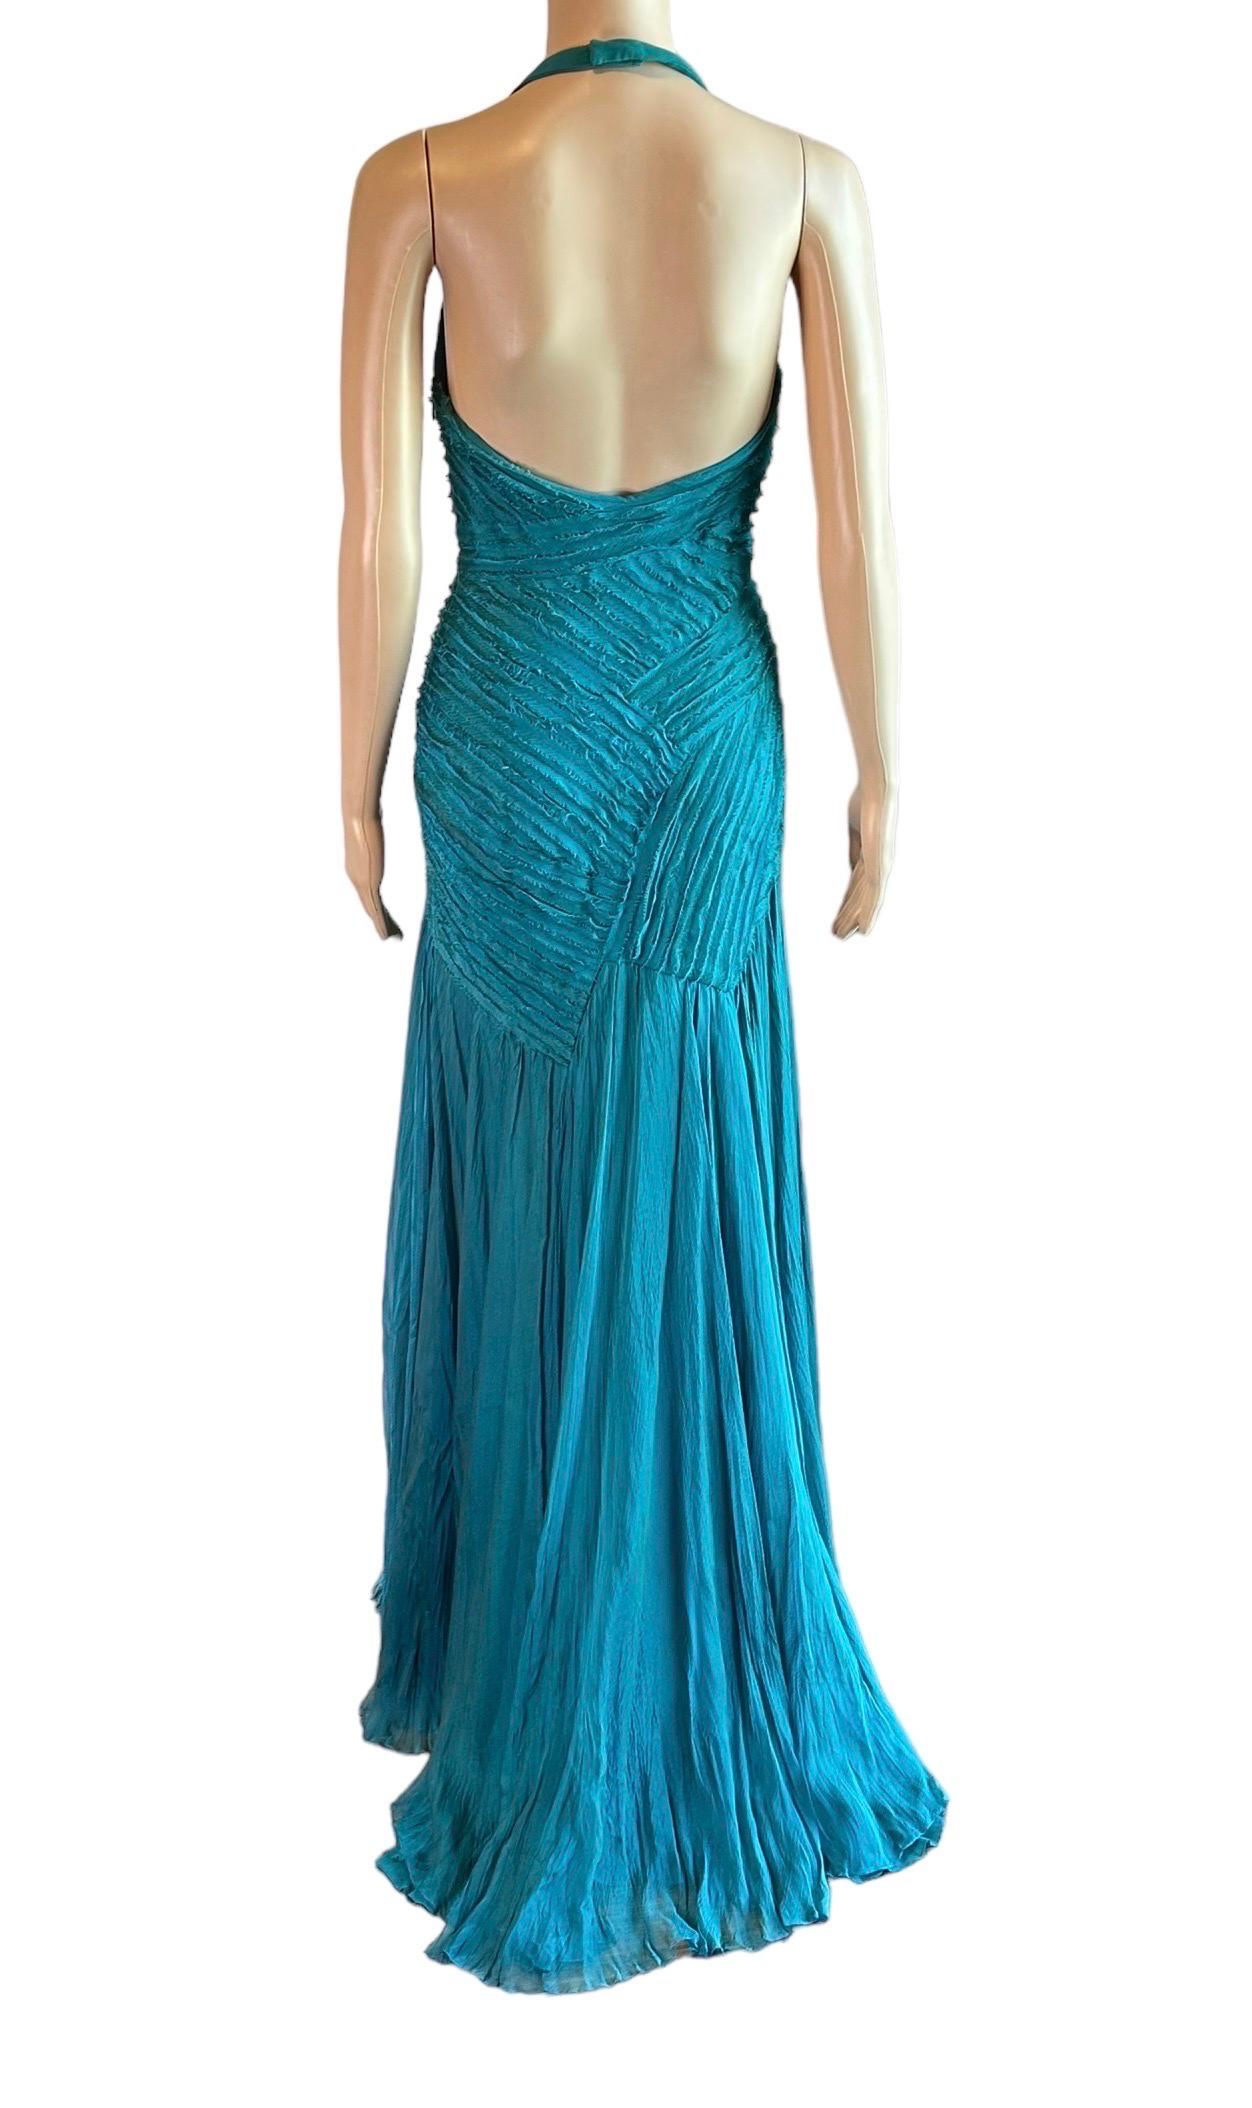 Versace F/W 2005 Runway Campaign Halter High Slit Slip Evening Dress Gown  For Sale 4